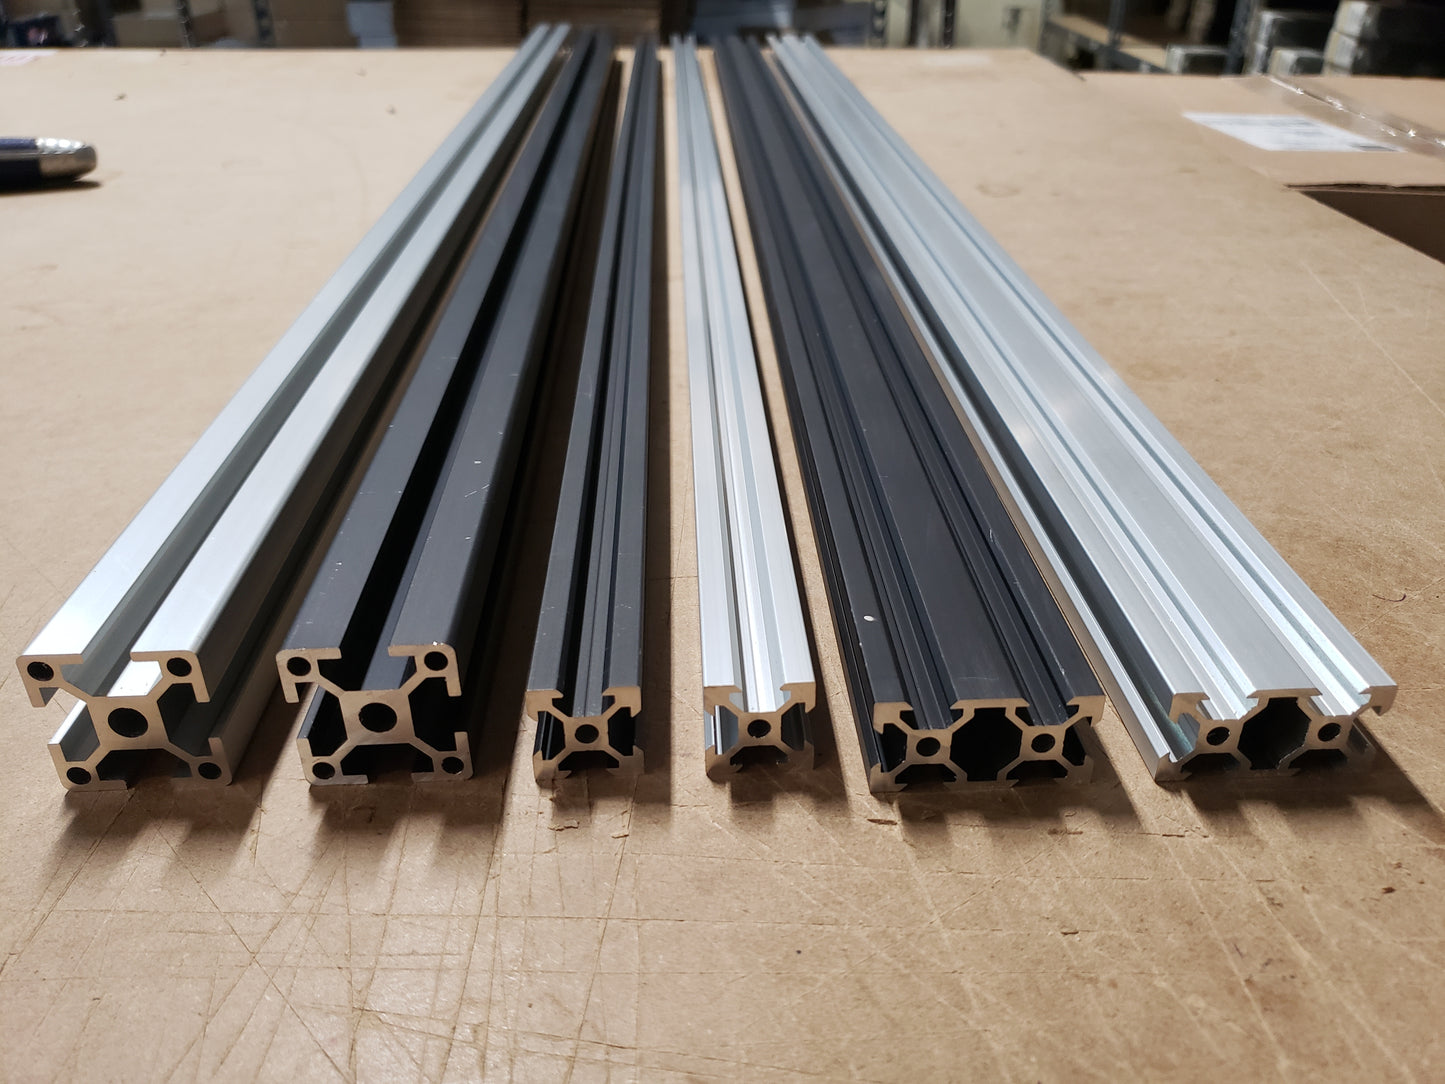 V-Rail Extrusion 2020 and 2040